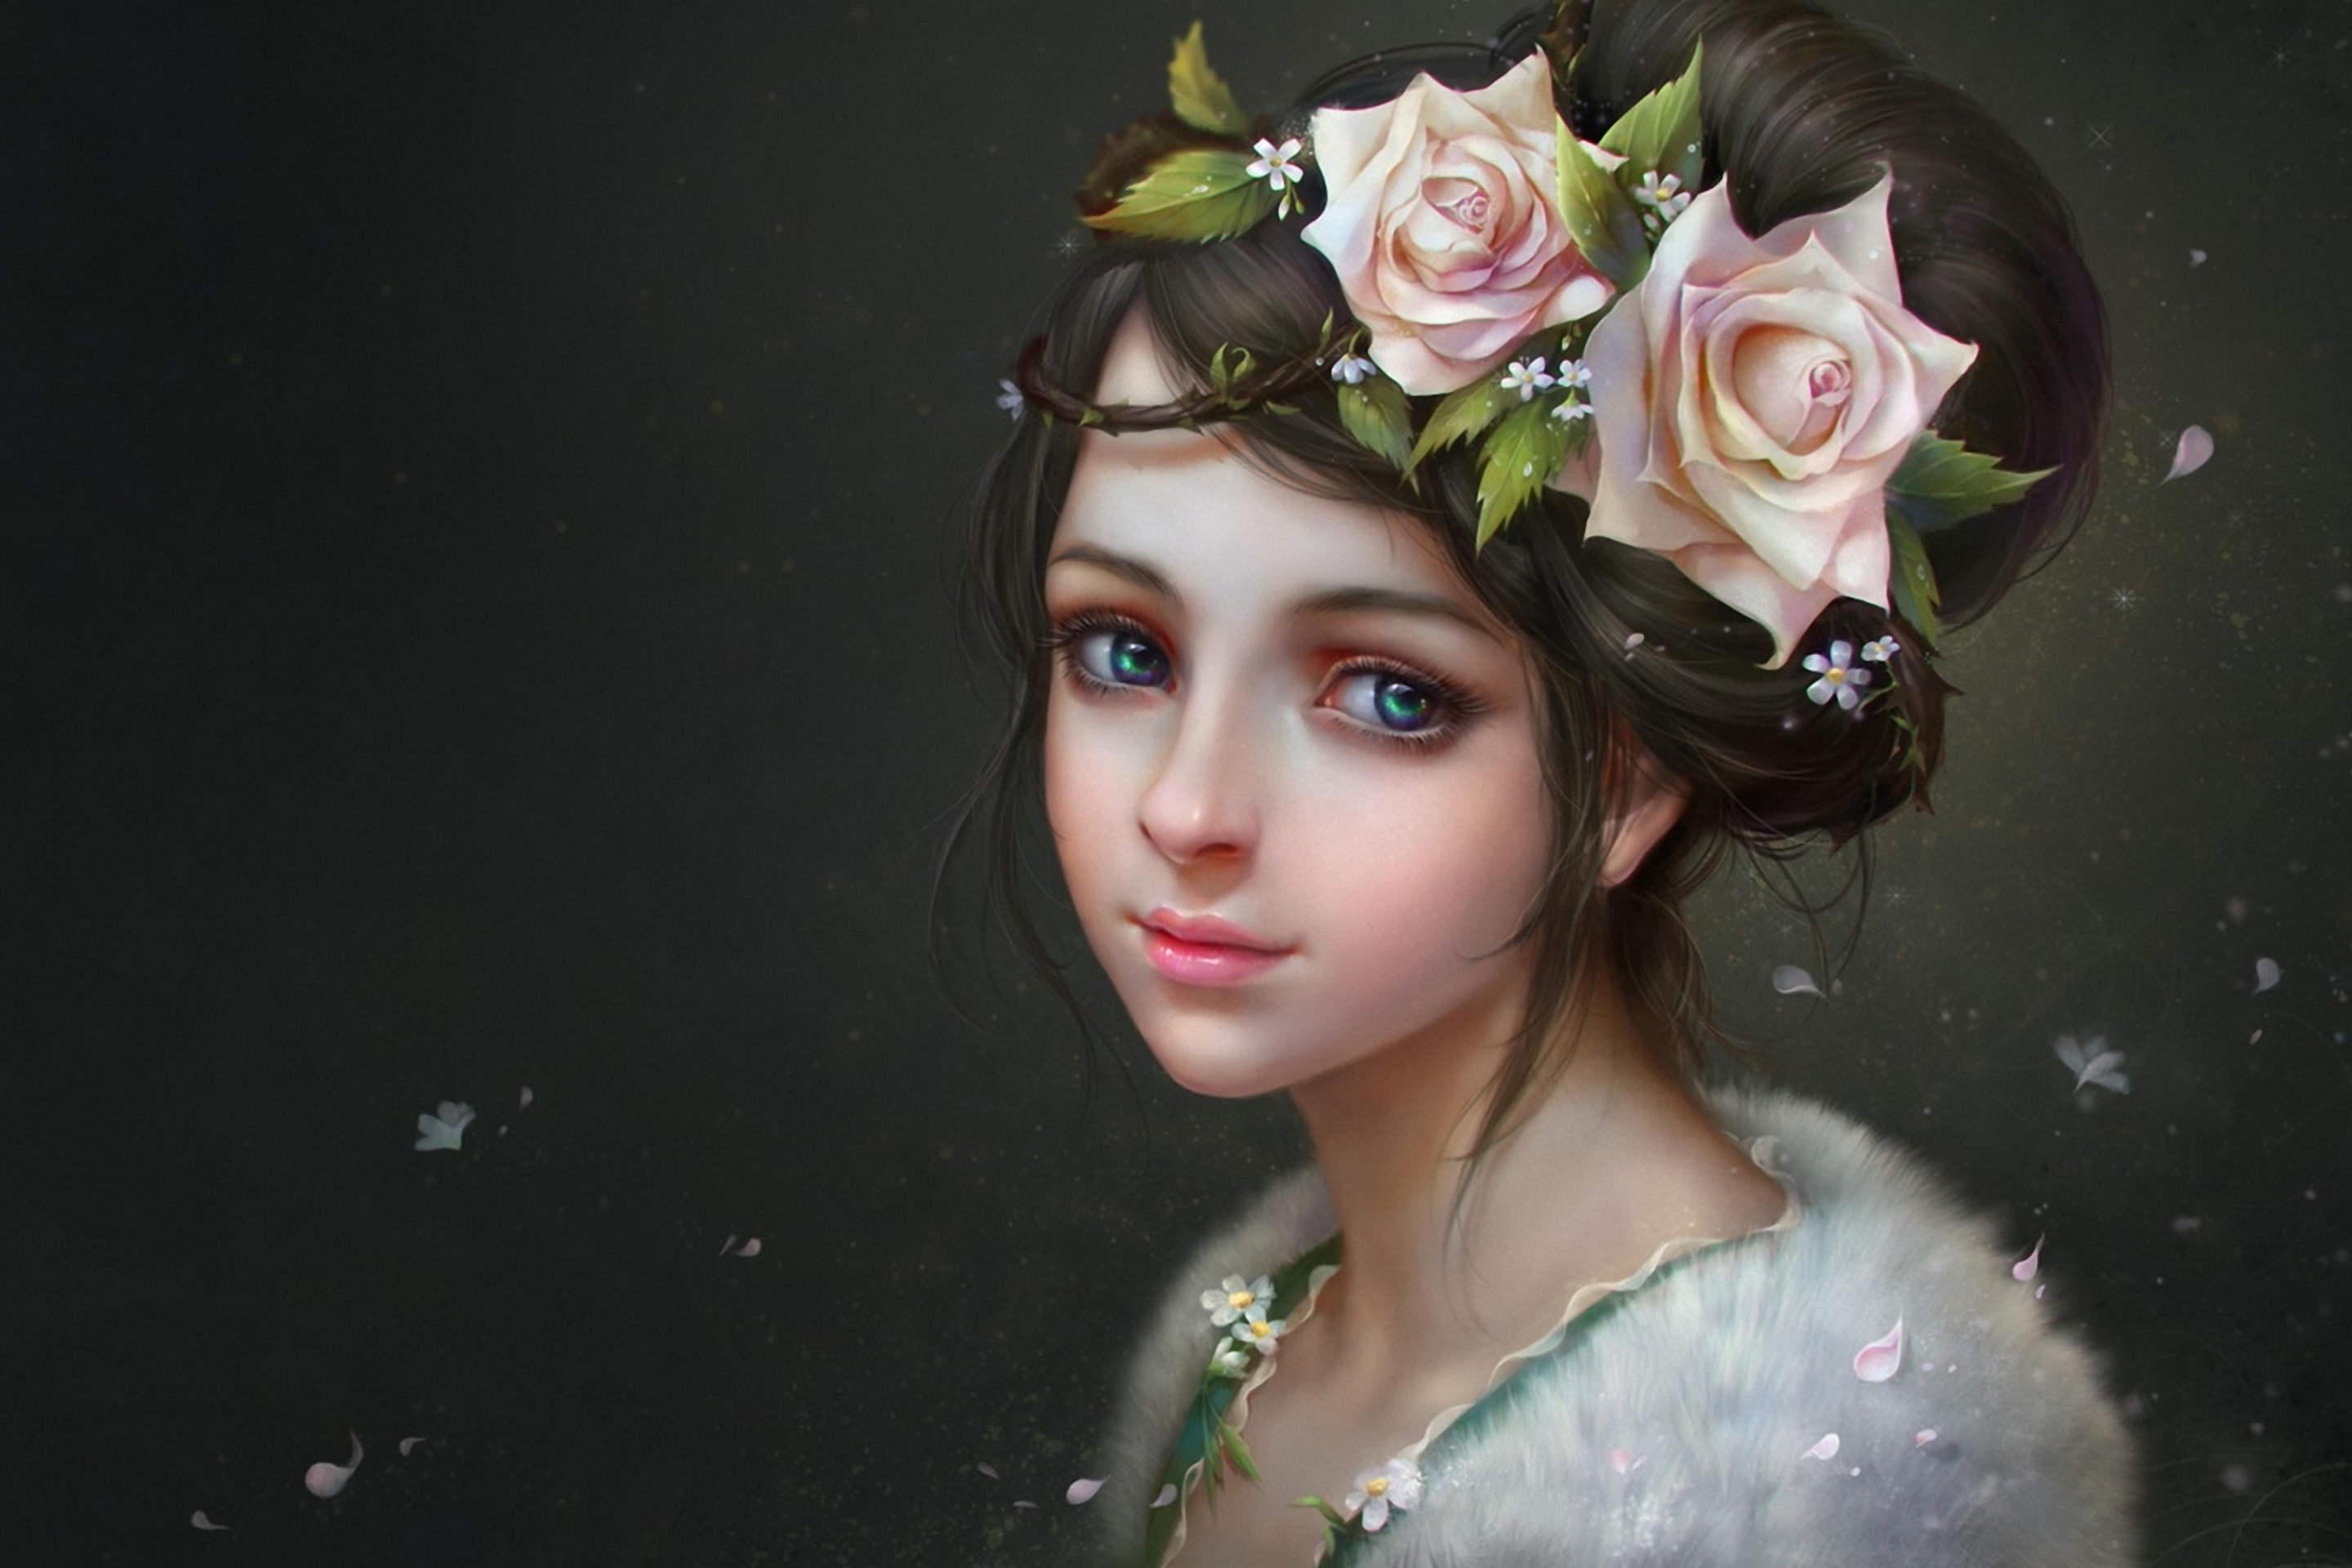 Girl With Roses In Her Hair Painting wallpaper 2880x1920